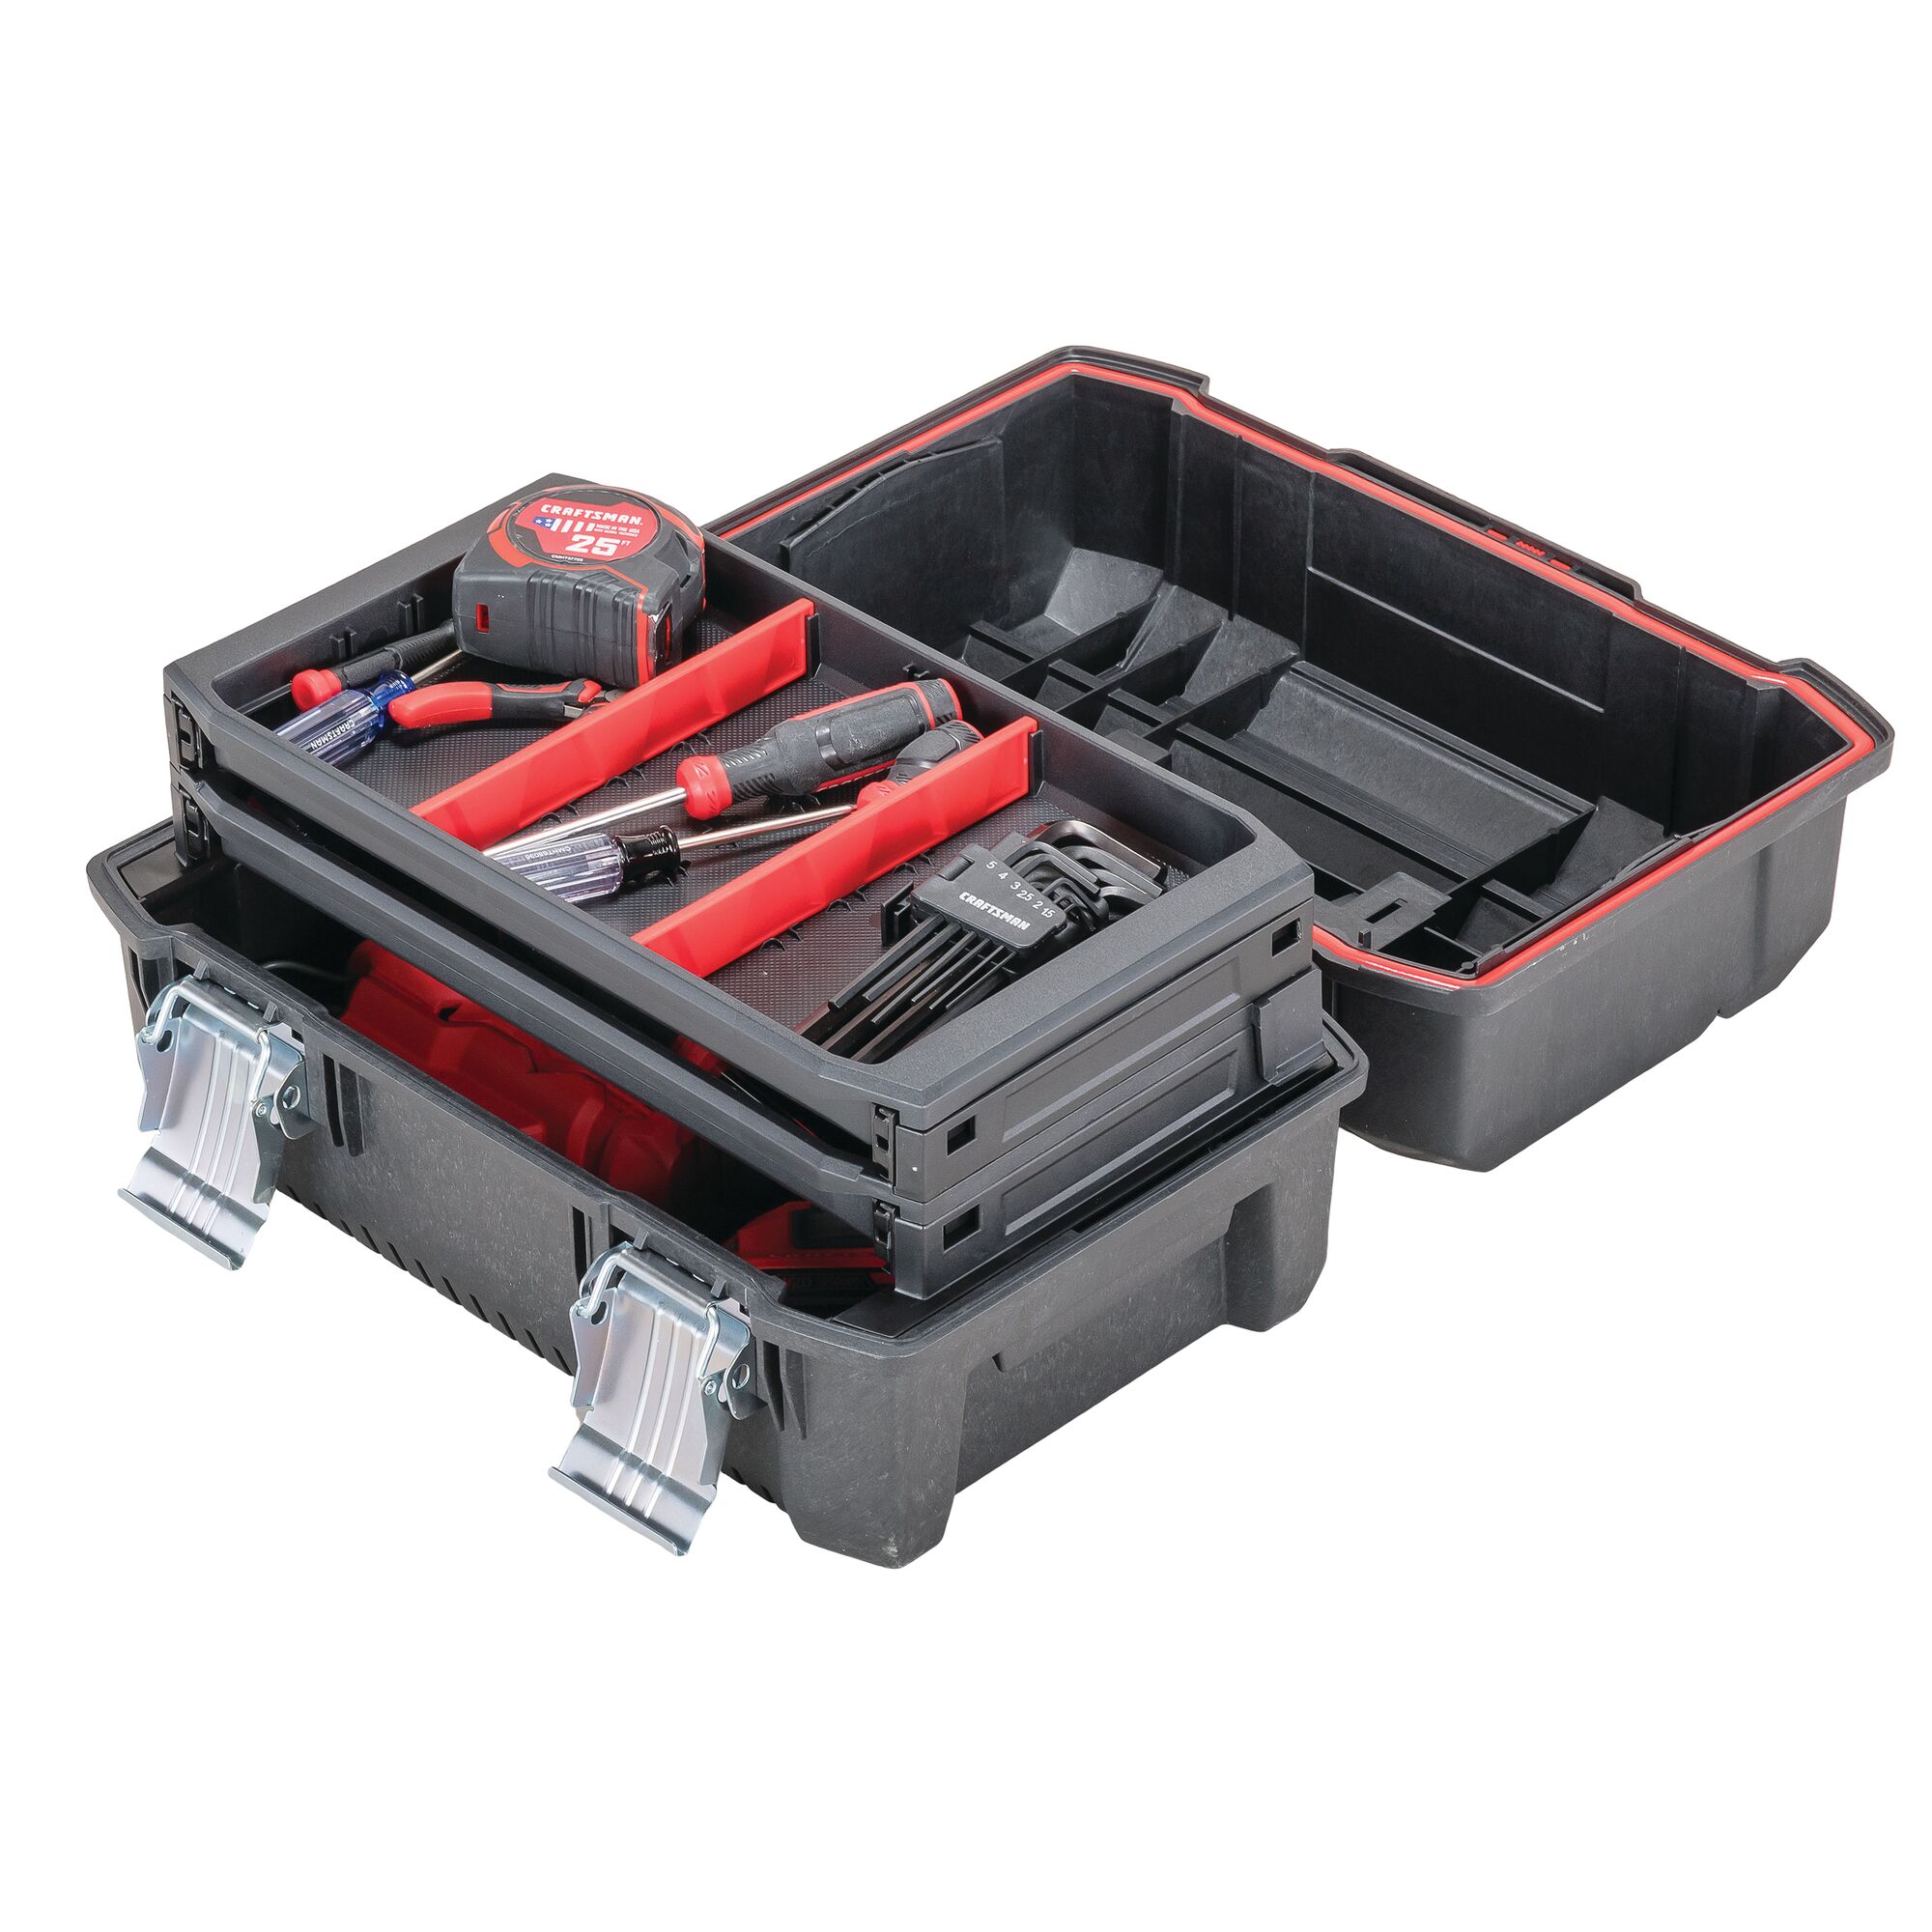 Customizable tool box feature of 18 inch Cantilever tool box.